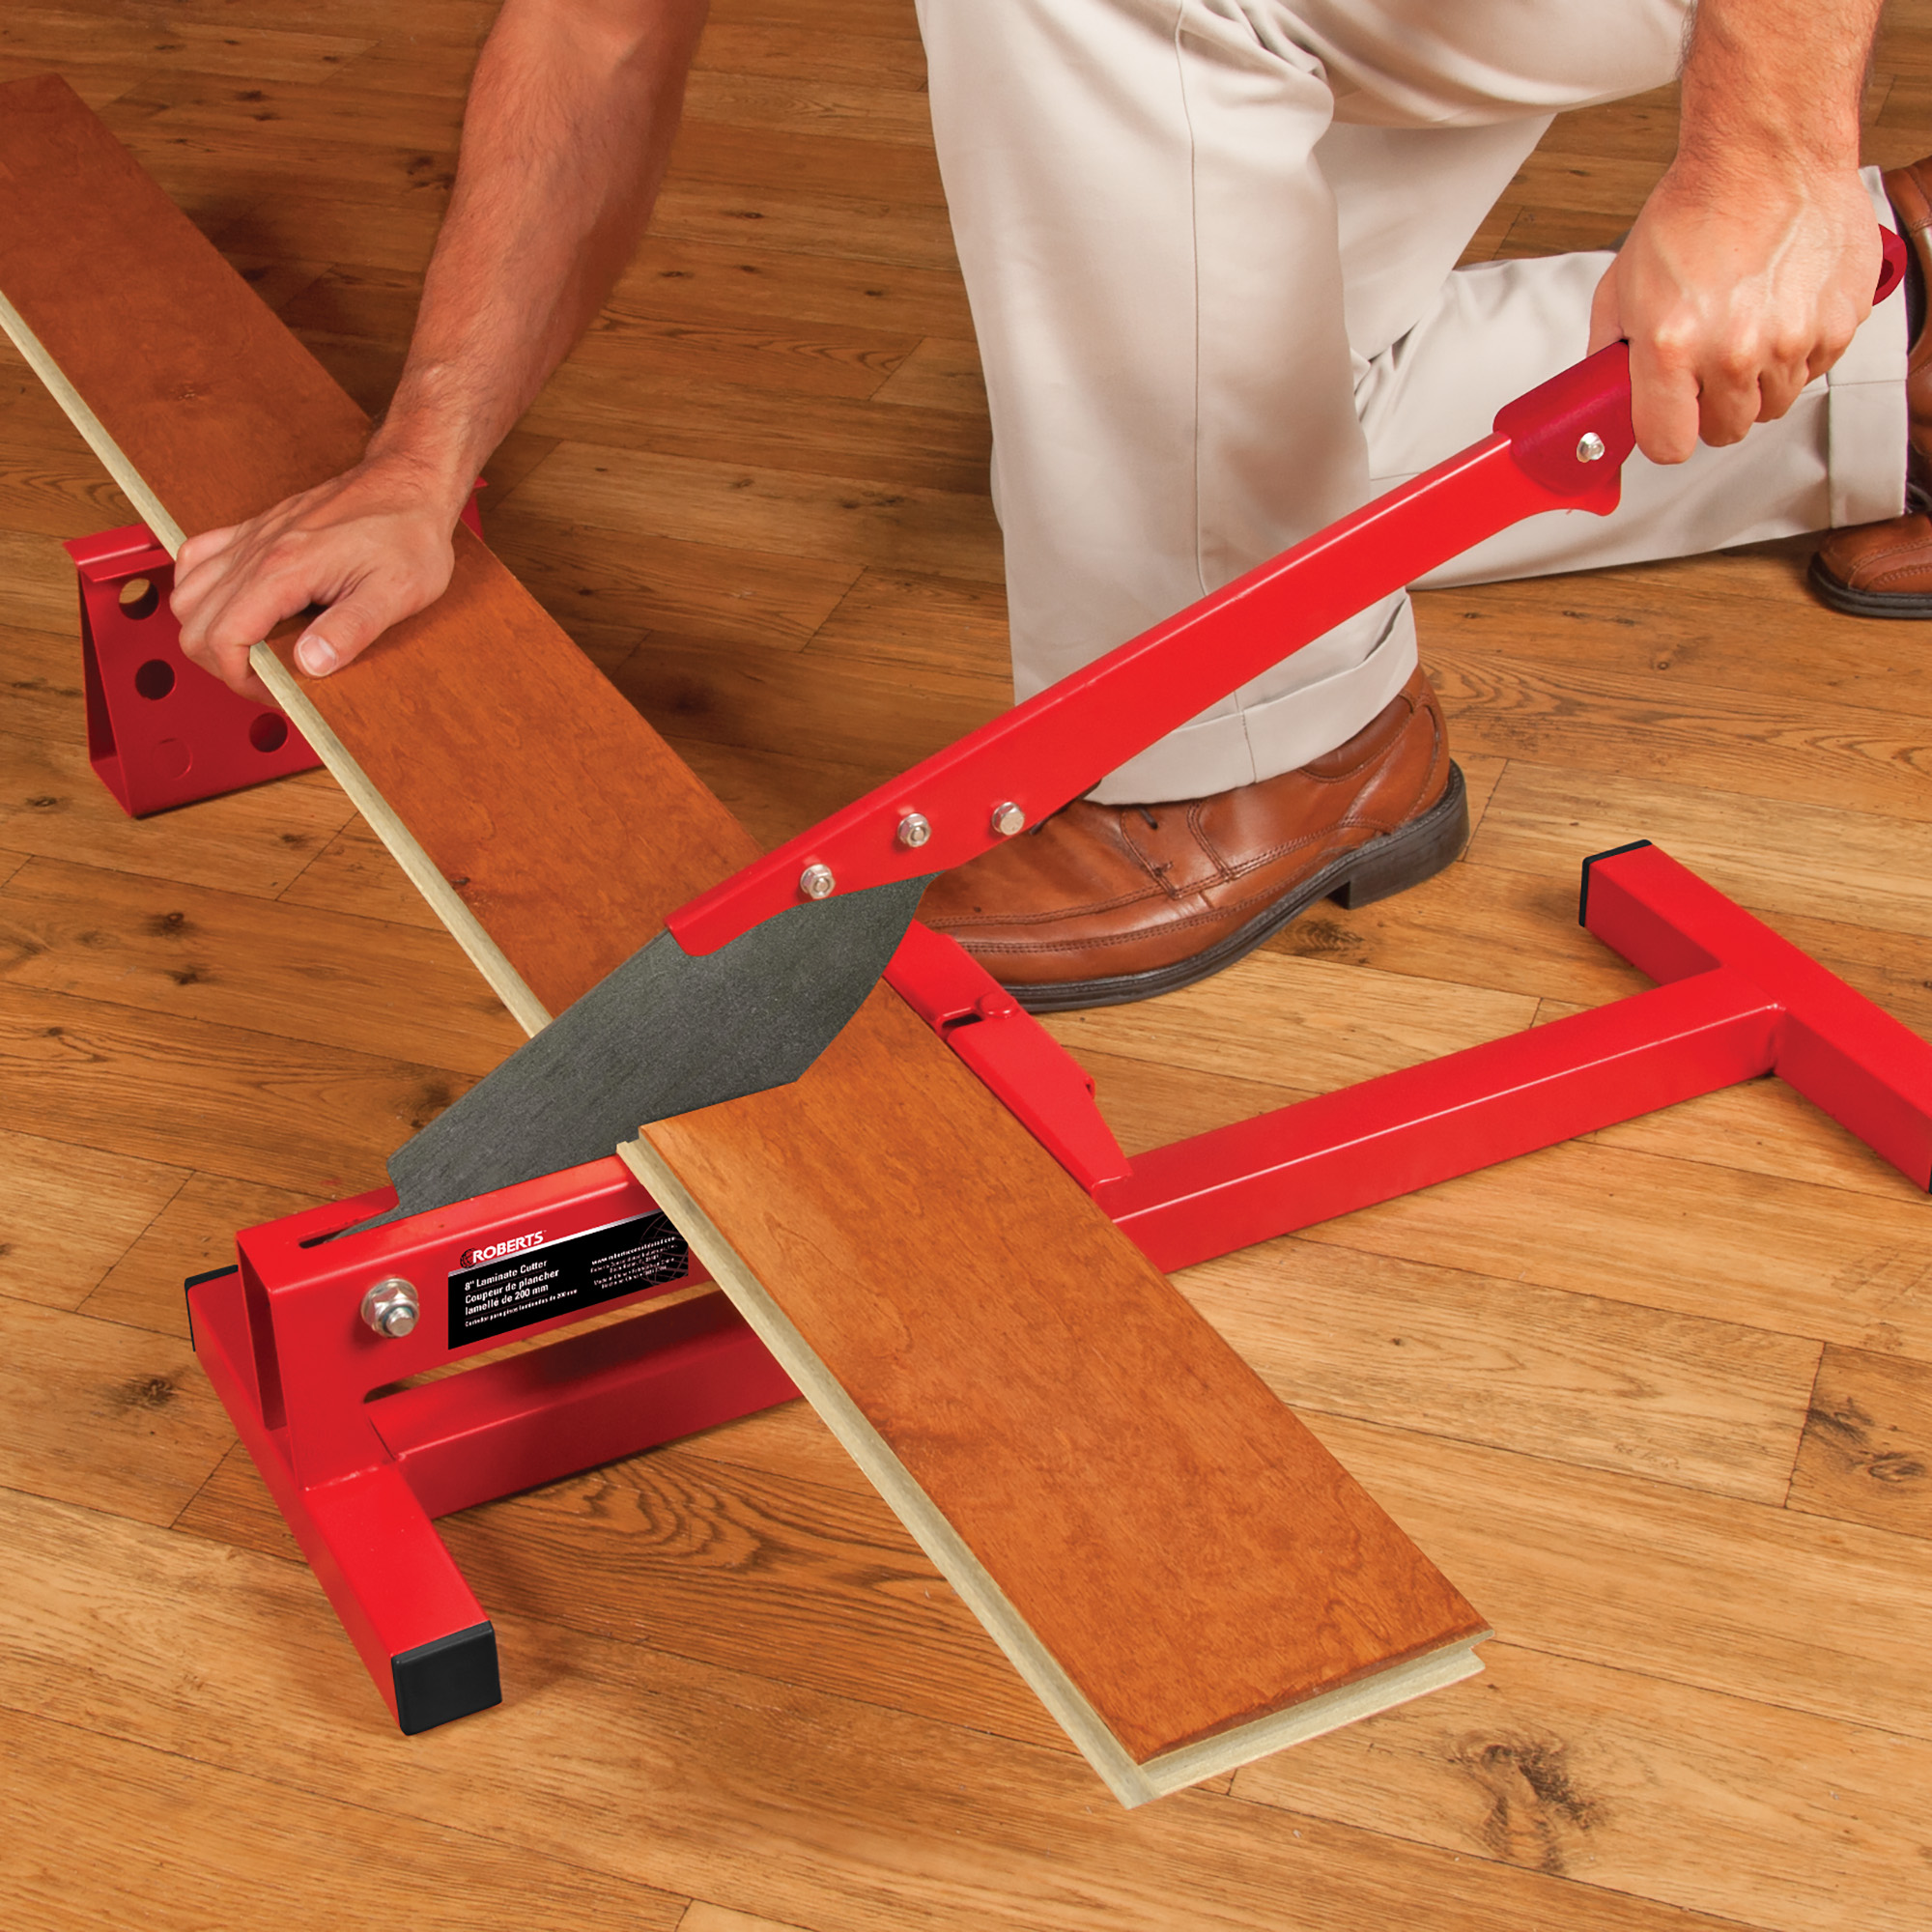 8 Laminate Cutter Roberts Consolidated, What Tools Do You Need To Cut Laminate Flooring